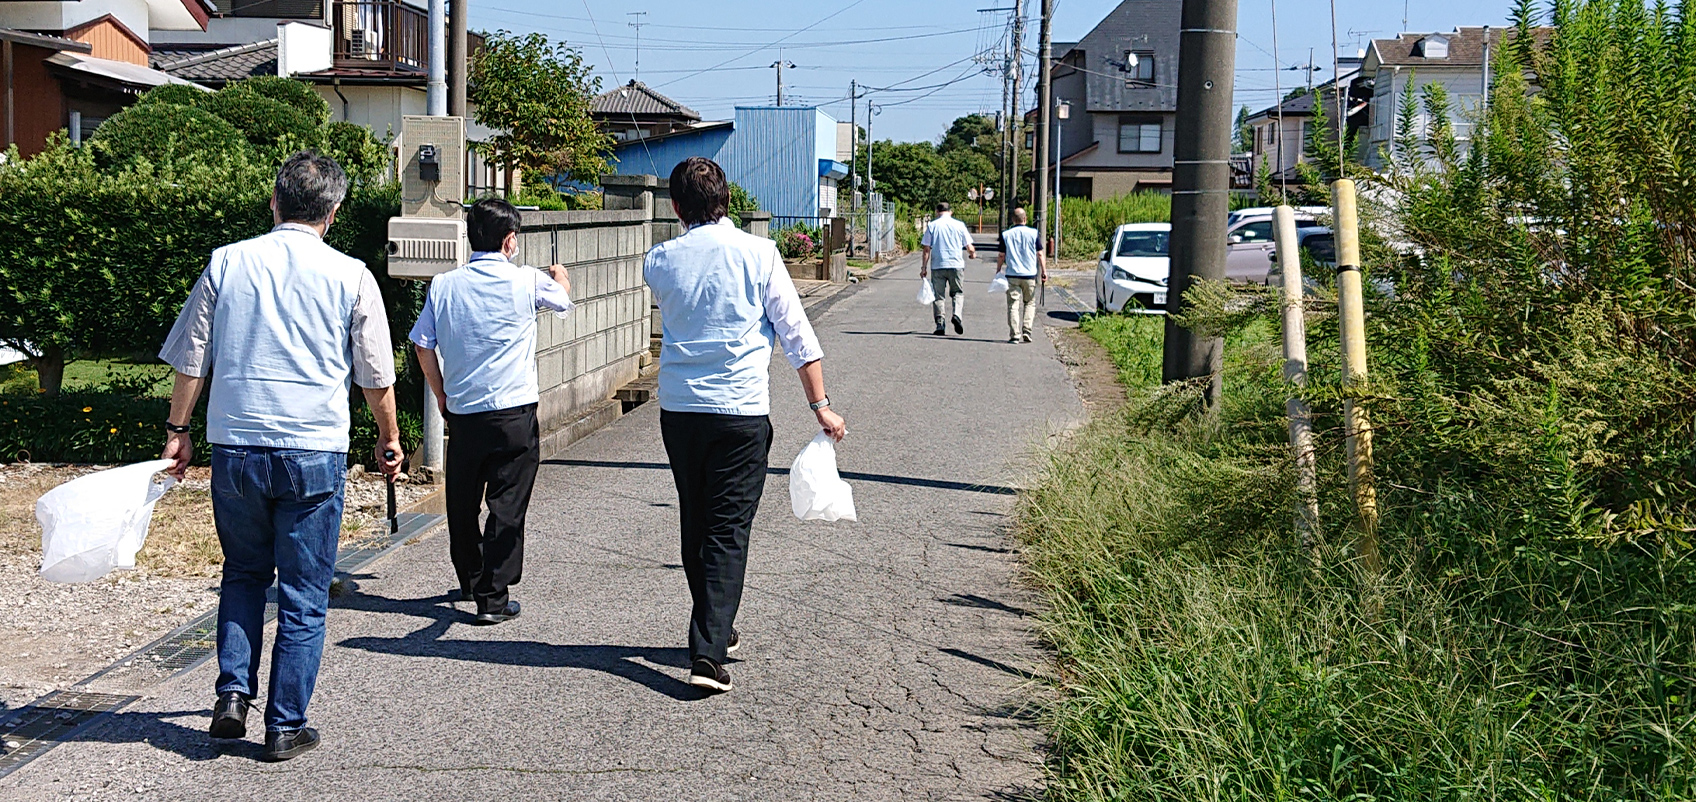 Employees picking up trash along the side of the sidewalk